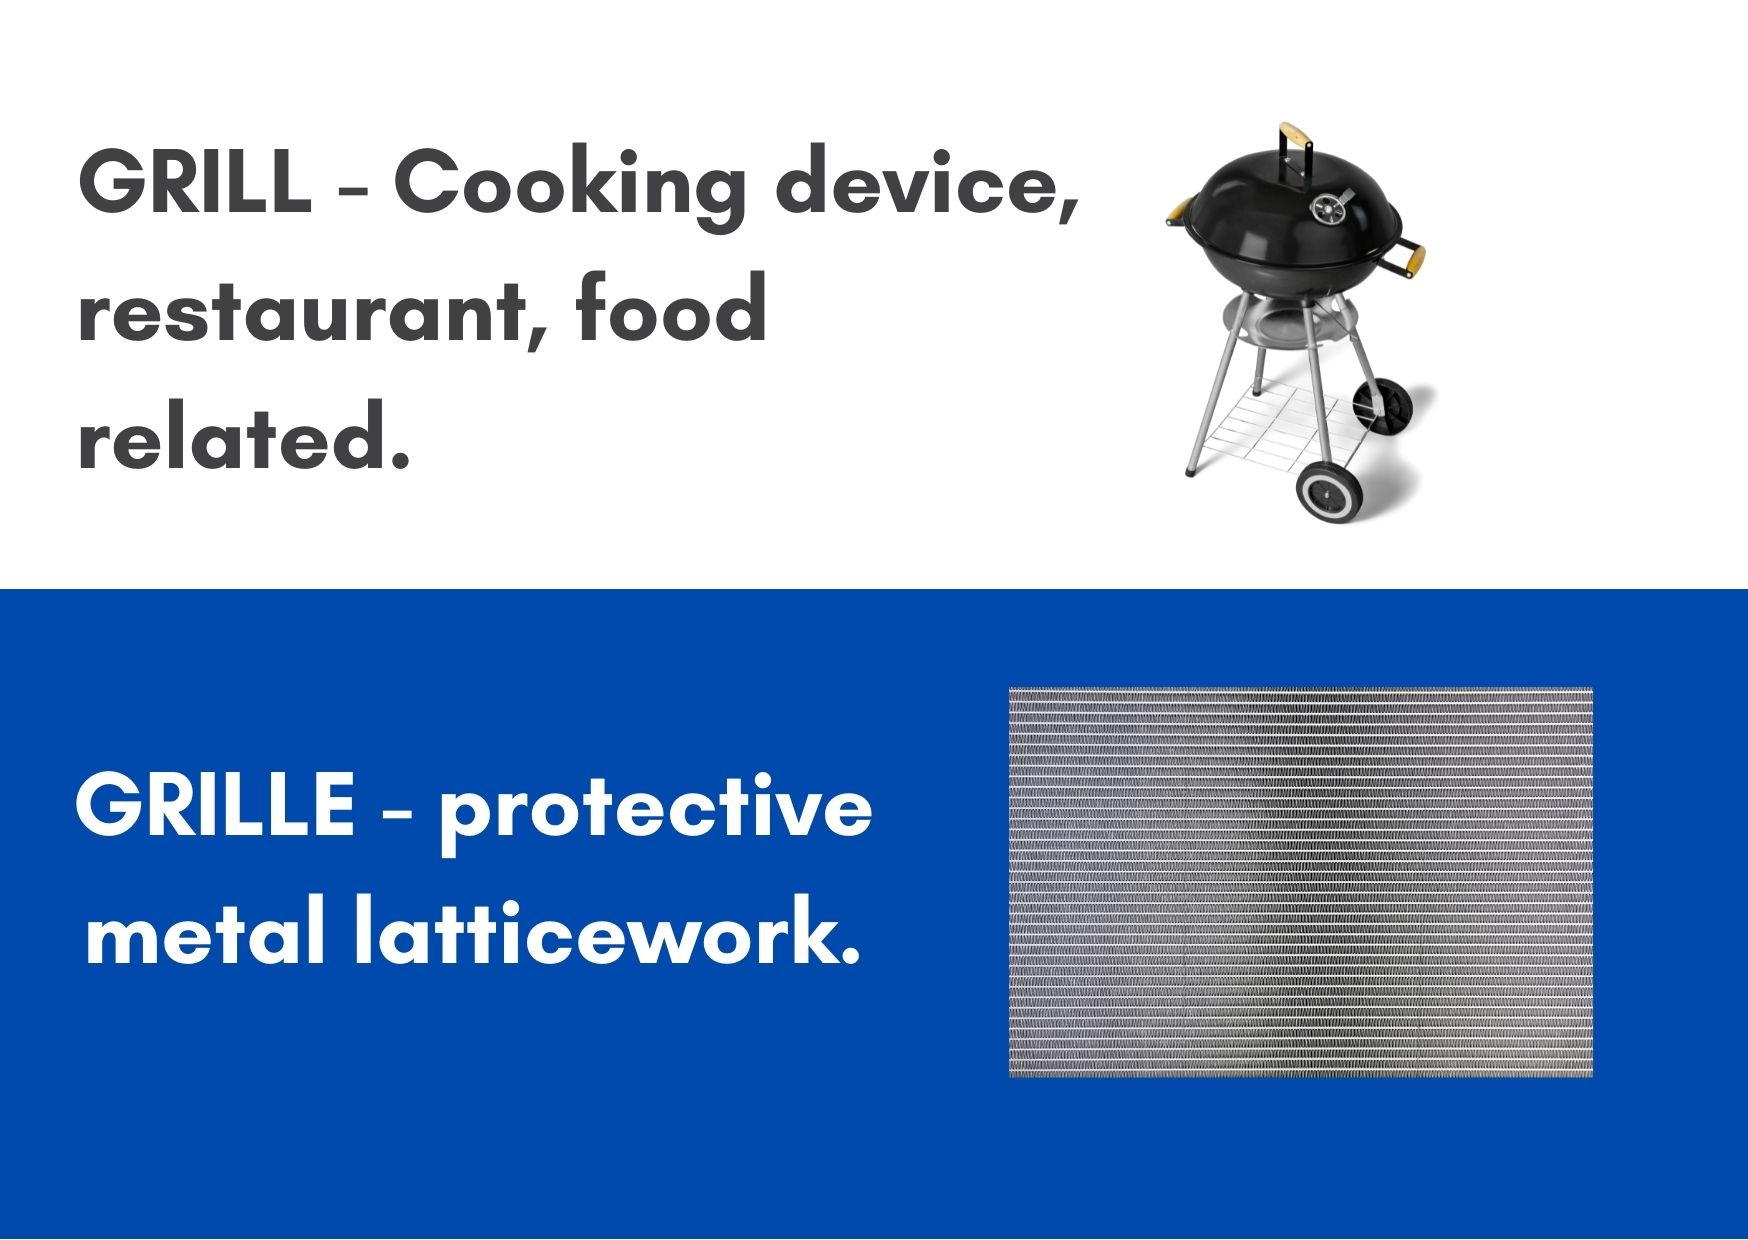 A graphic explaining the difference between a grill (cooking devise) and a grille (a metal latticework)